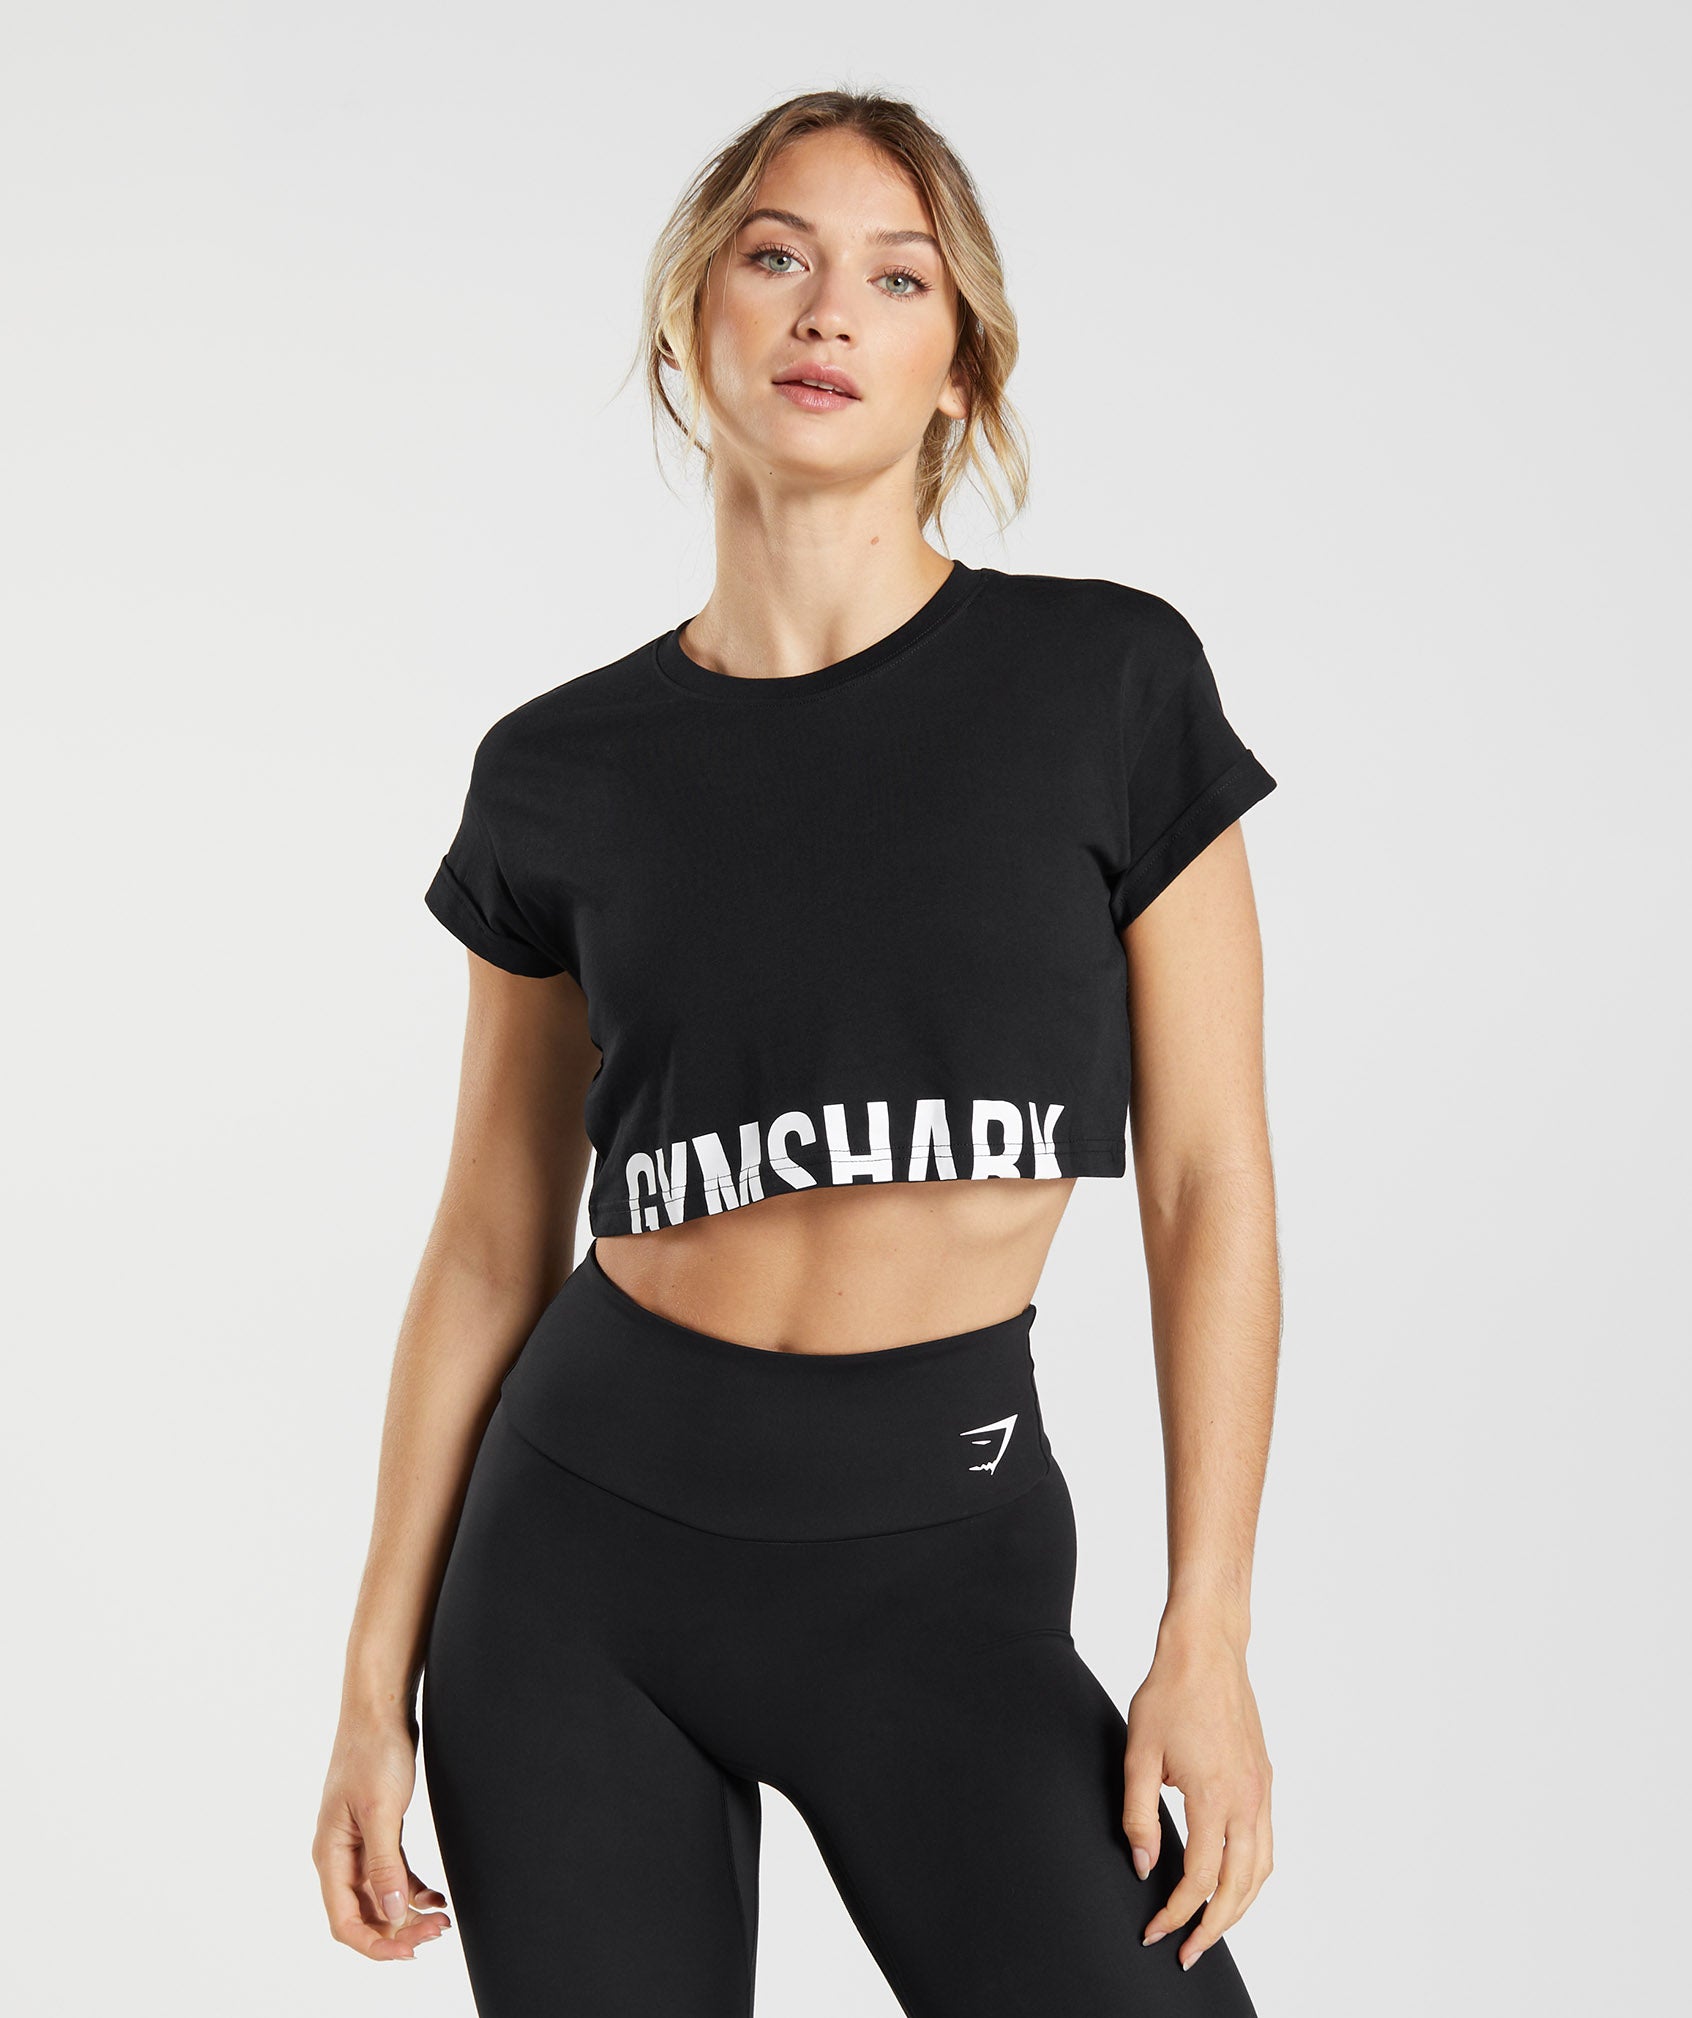 Fraction Crop Top in Black/White - view 1